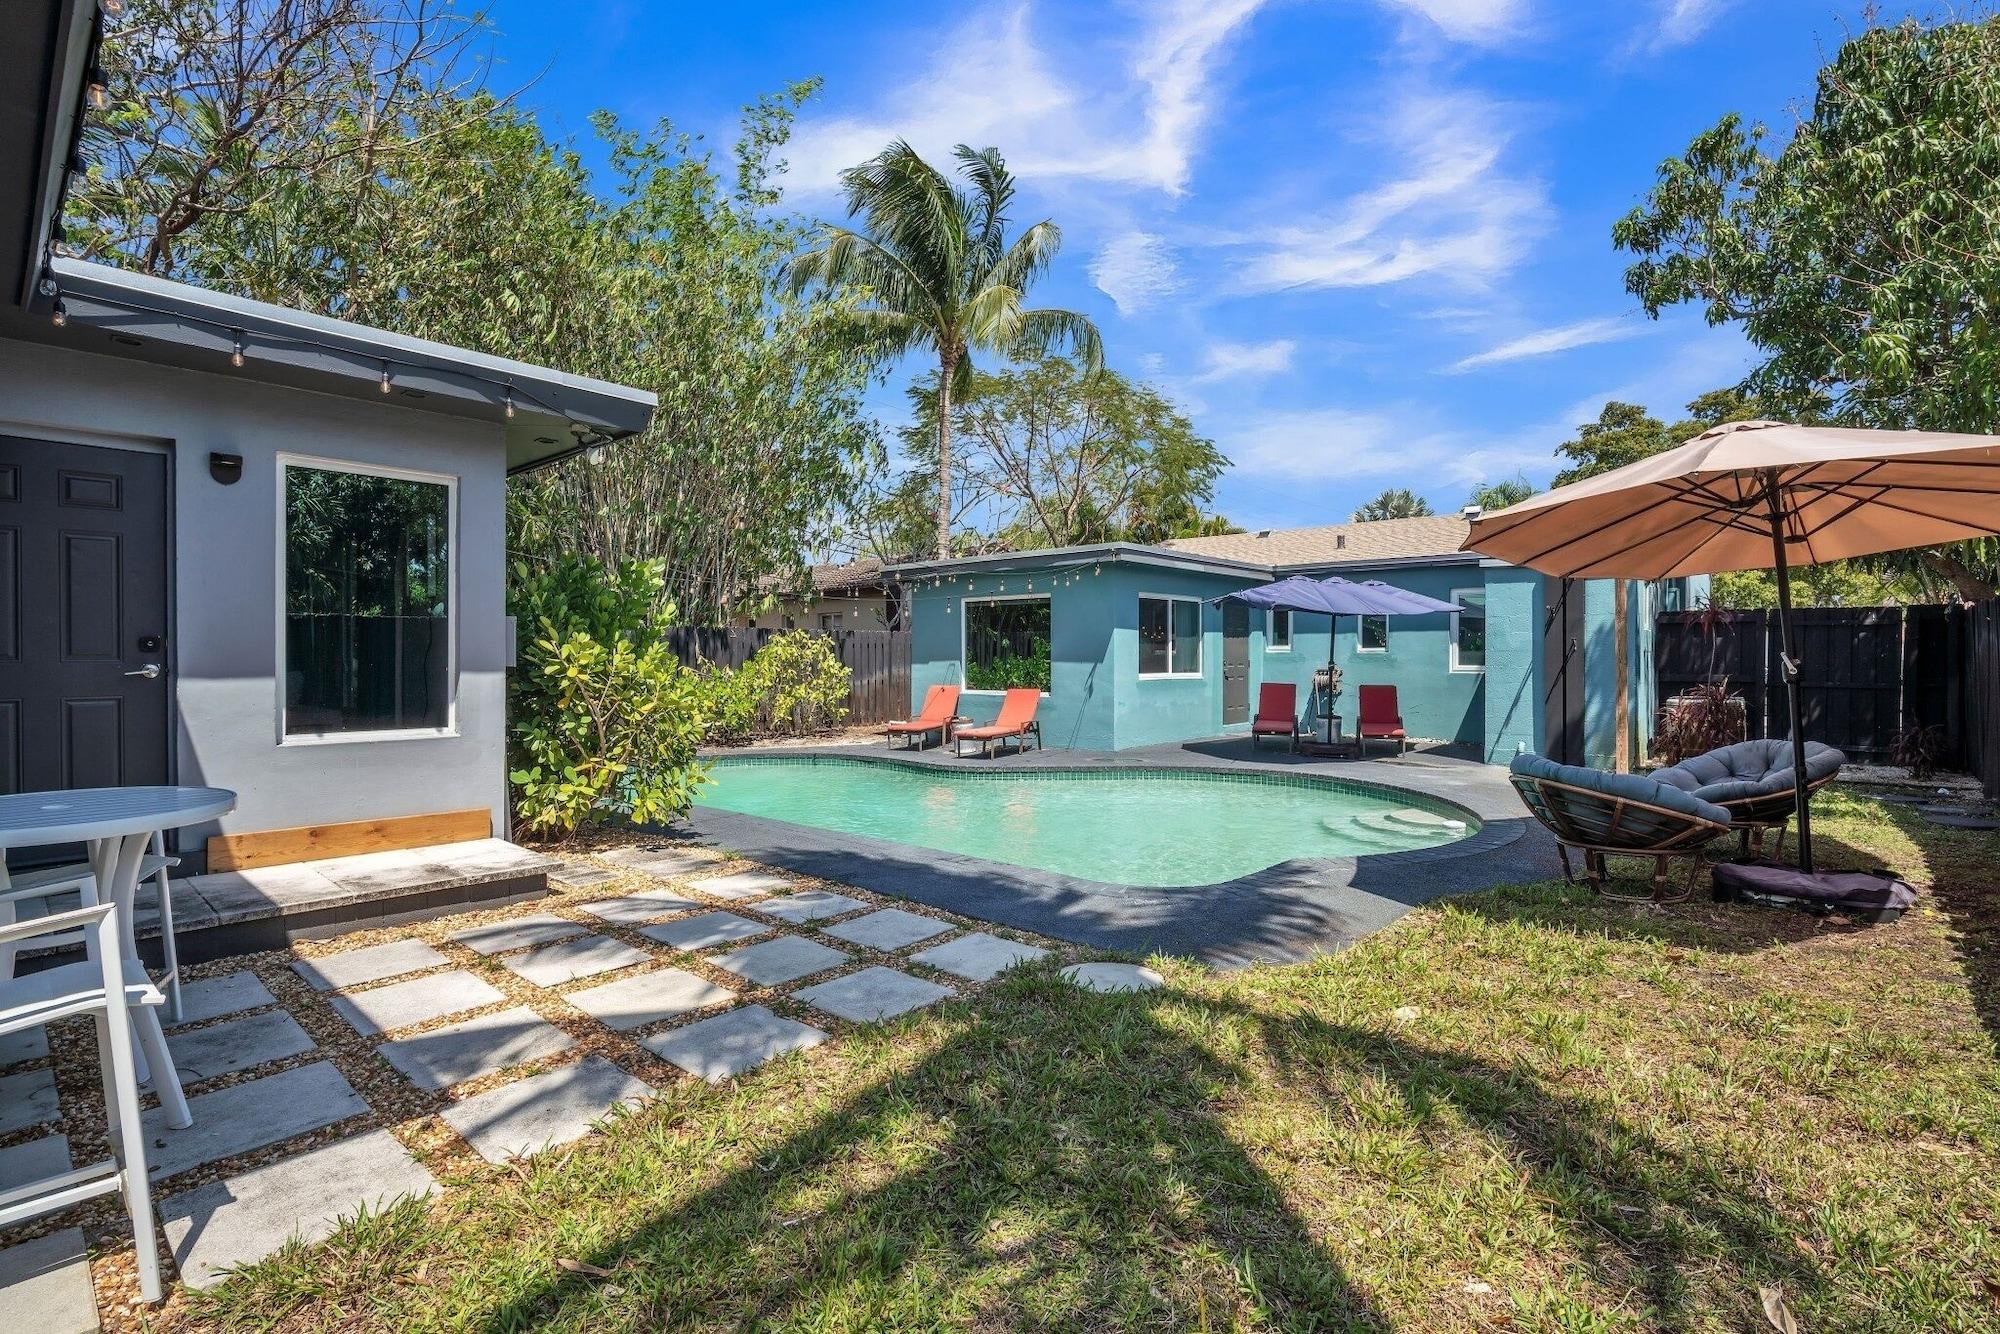 Miscellaneous Great Wilton Manors Location With Two Separate Spaces! Perfect For Your Group! Newly Remodeled 3 Bedroom Home by Redawning